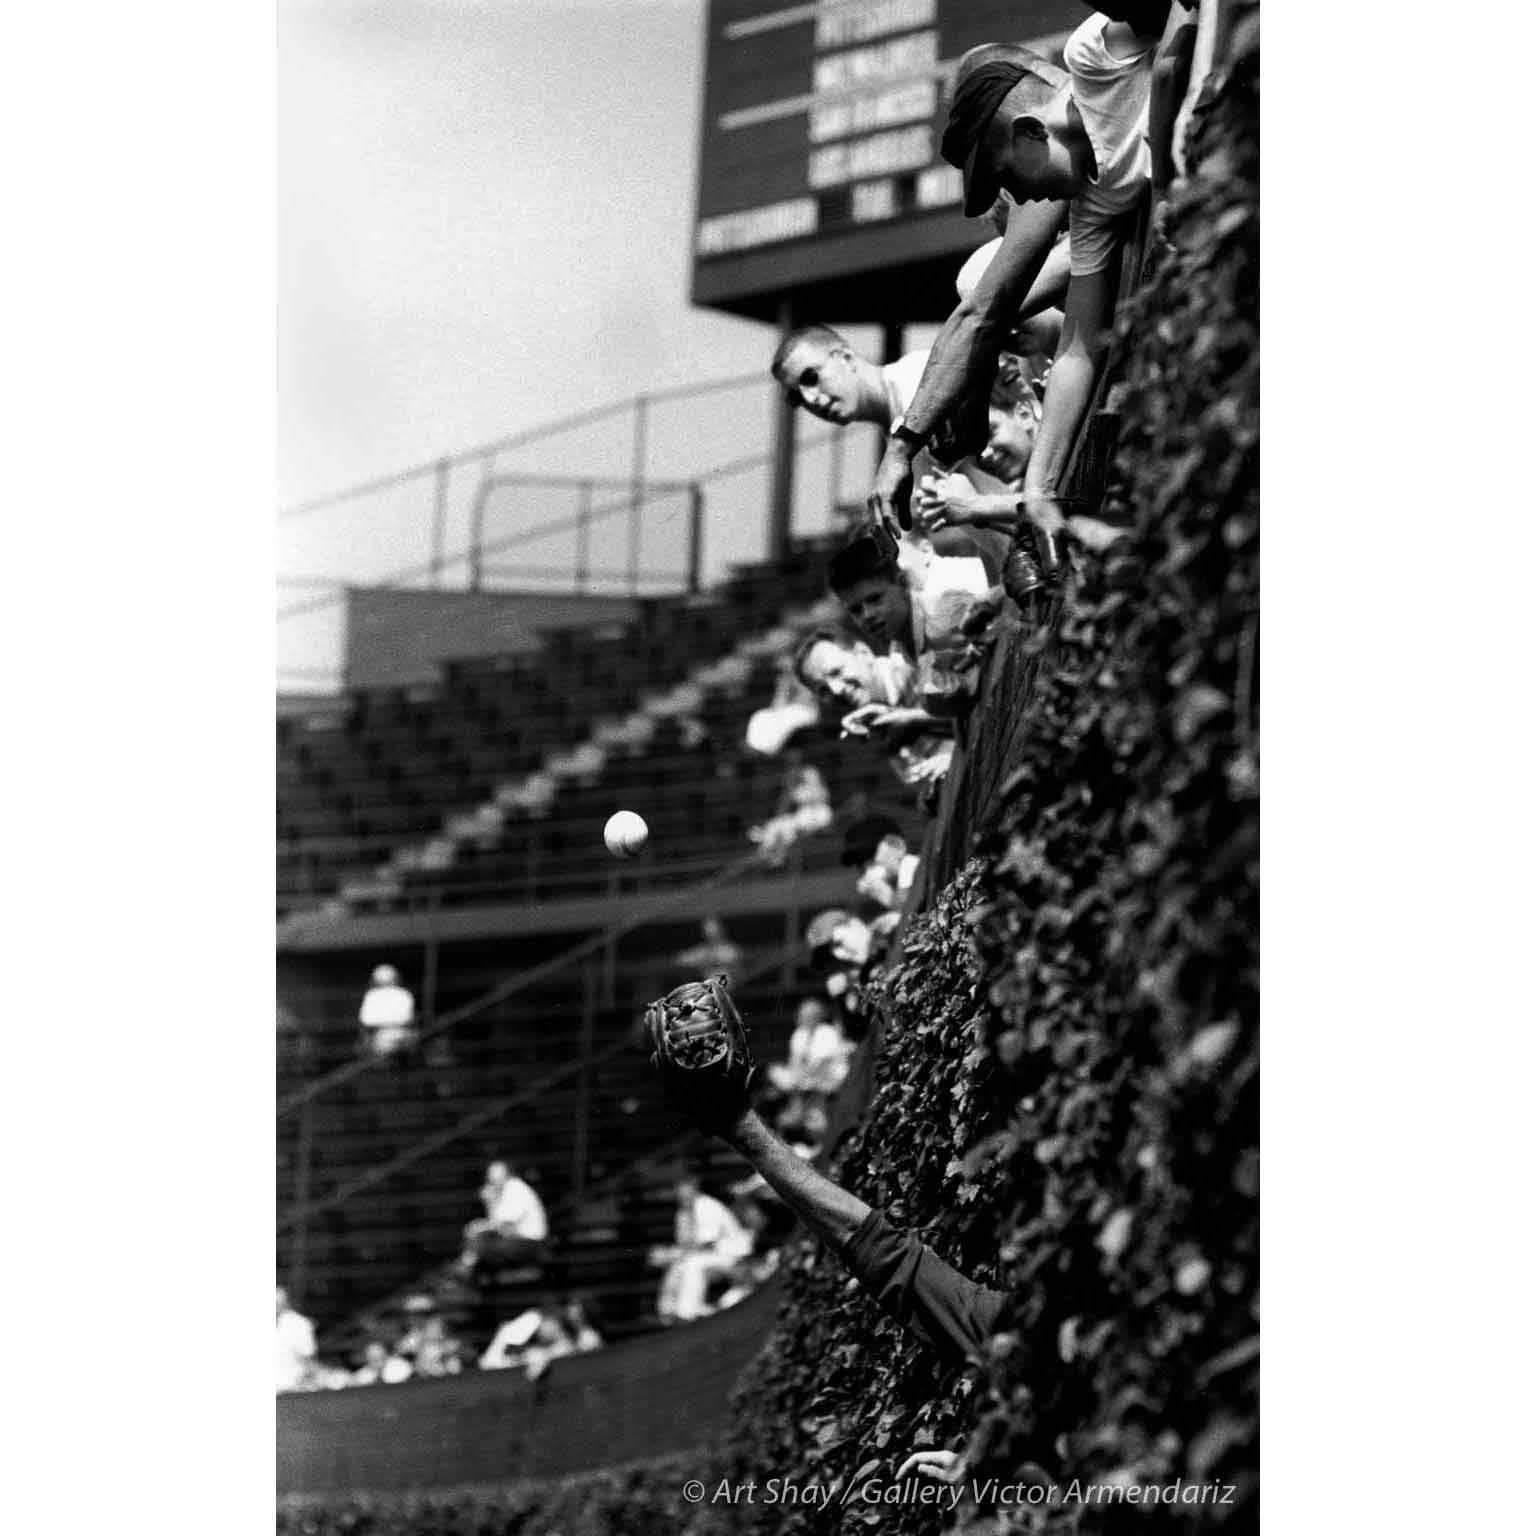 Field Practice in the Wrigley Vines, Chicago, 1961 - Photograph by Art Shay